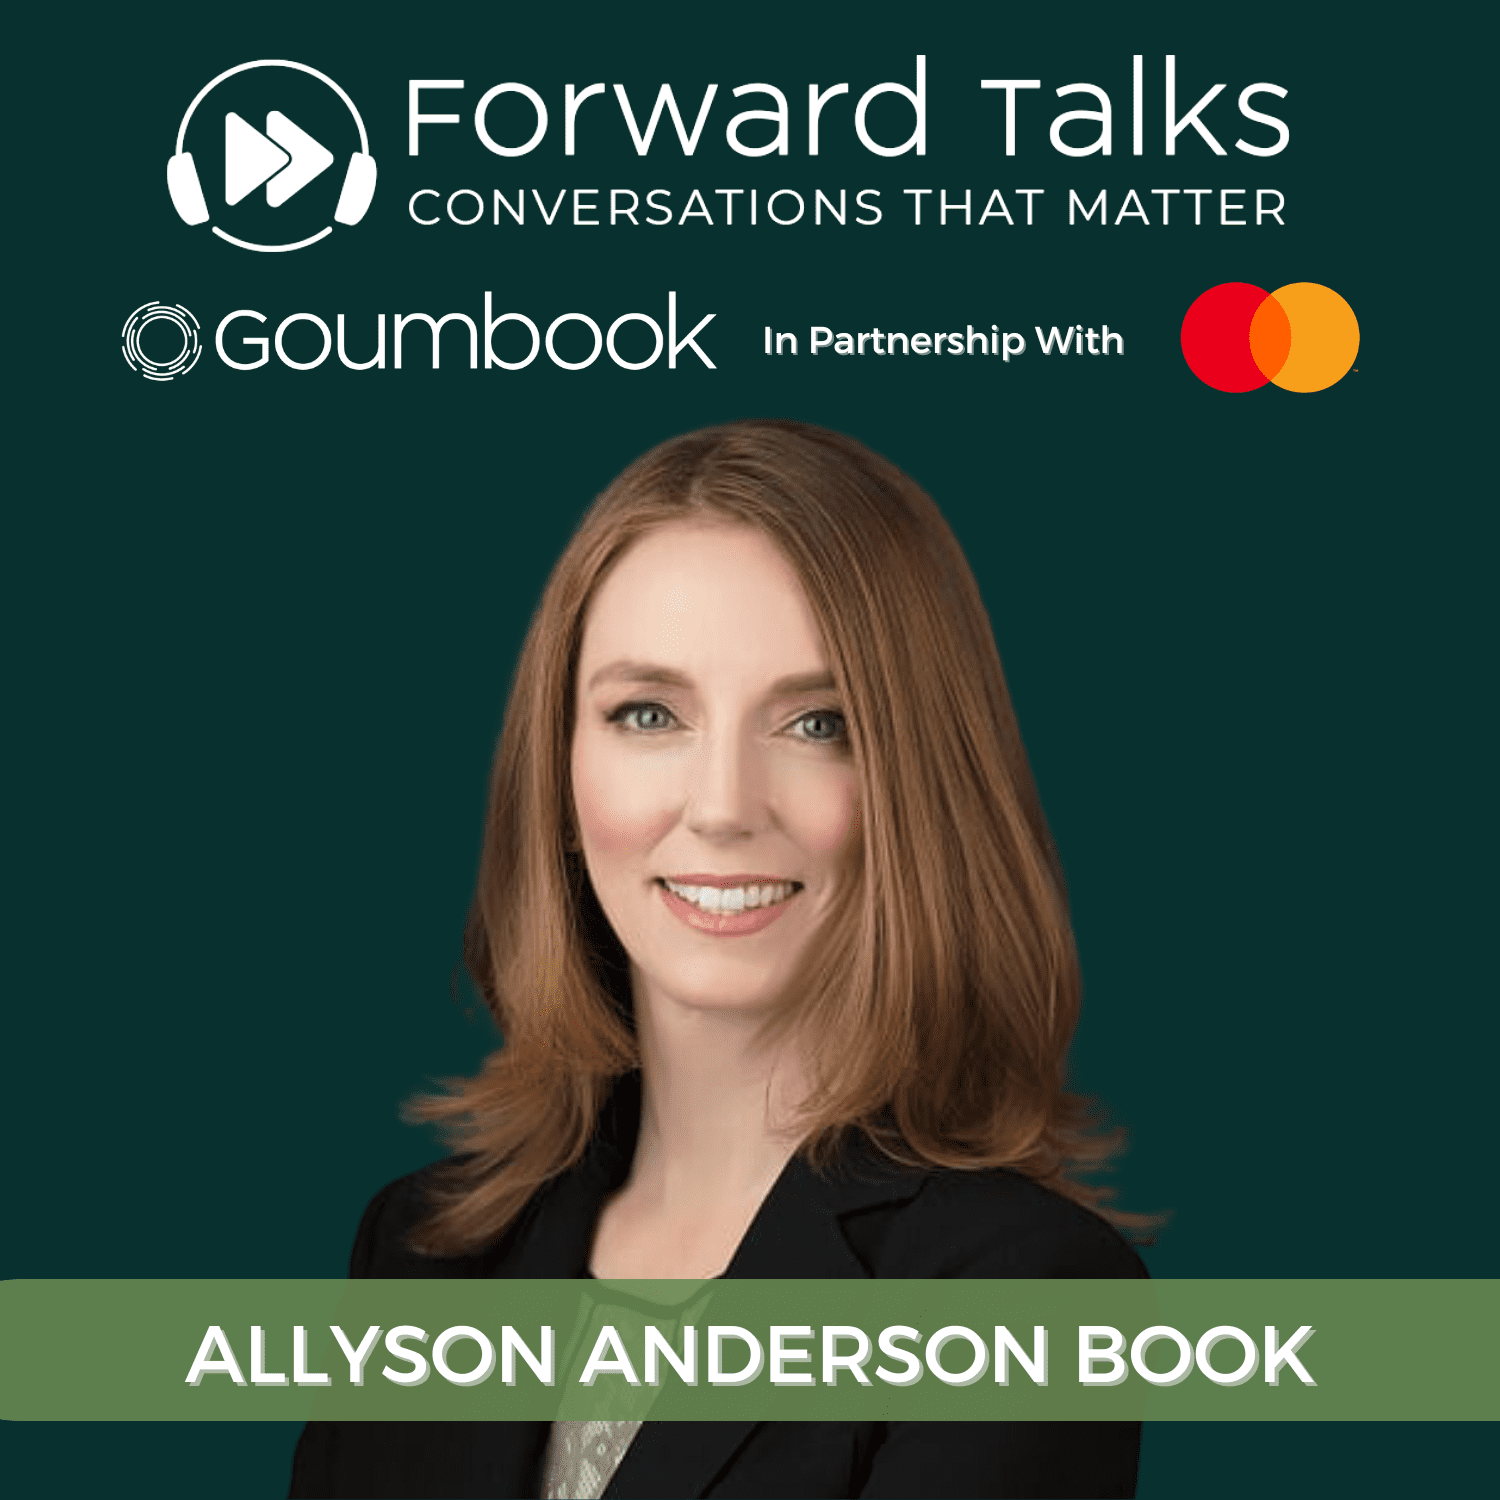 You are currently viewing Allyson Anderson Book on the energy transition as an opportunity for innovation and collaboration